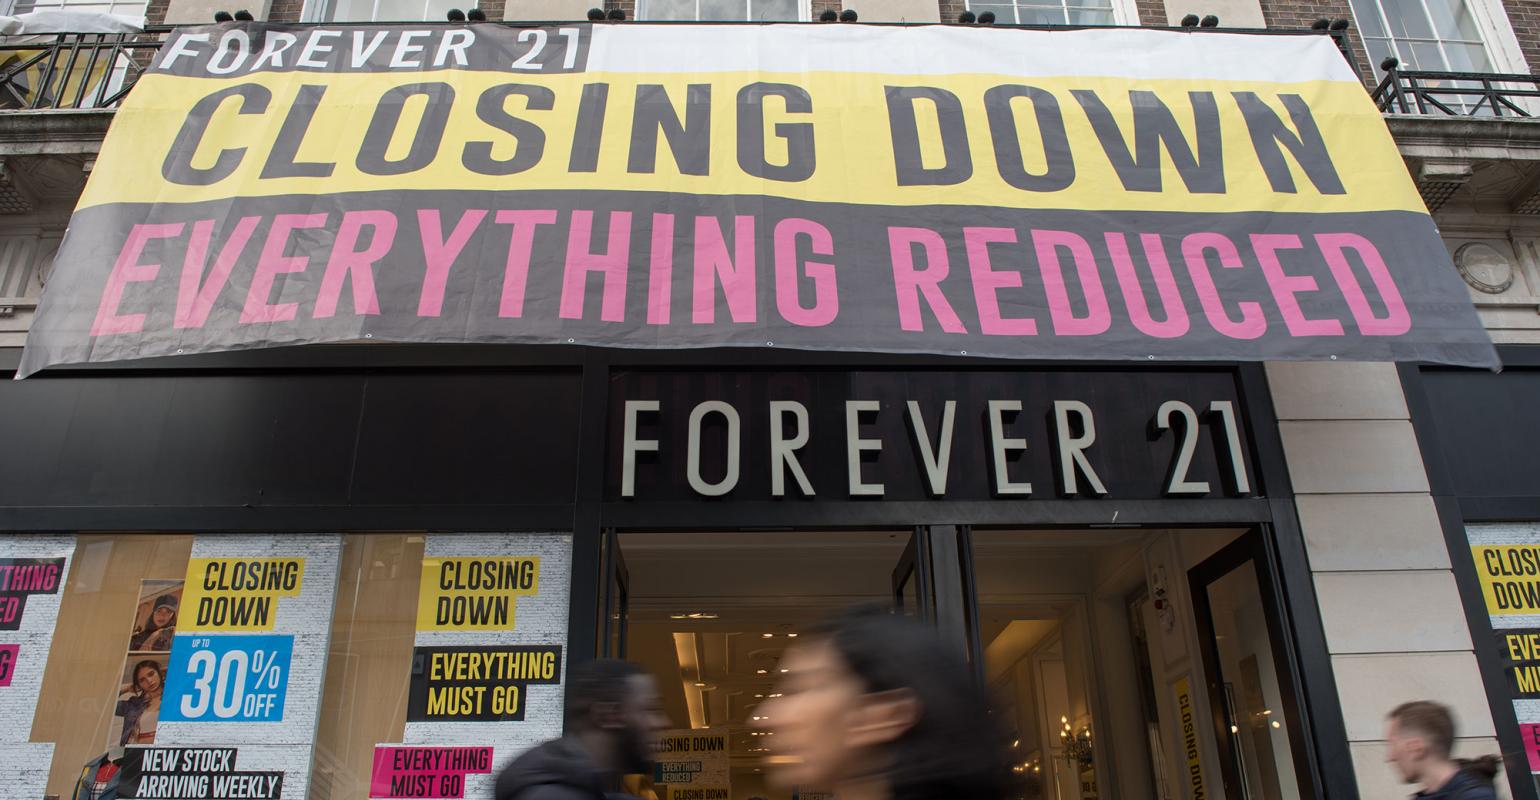 Forever 21 reaches deal to sell its retail business for $81 million